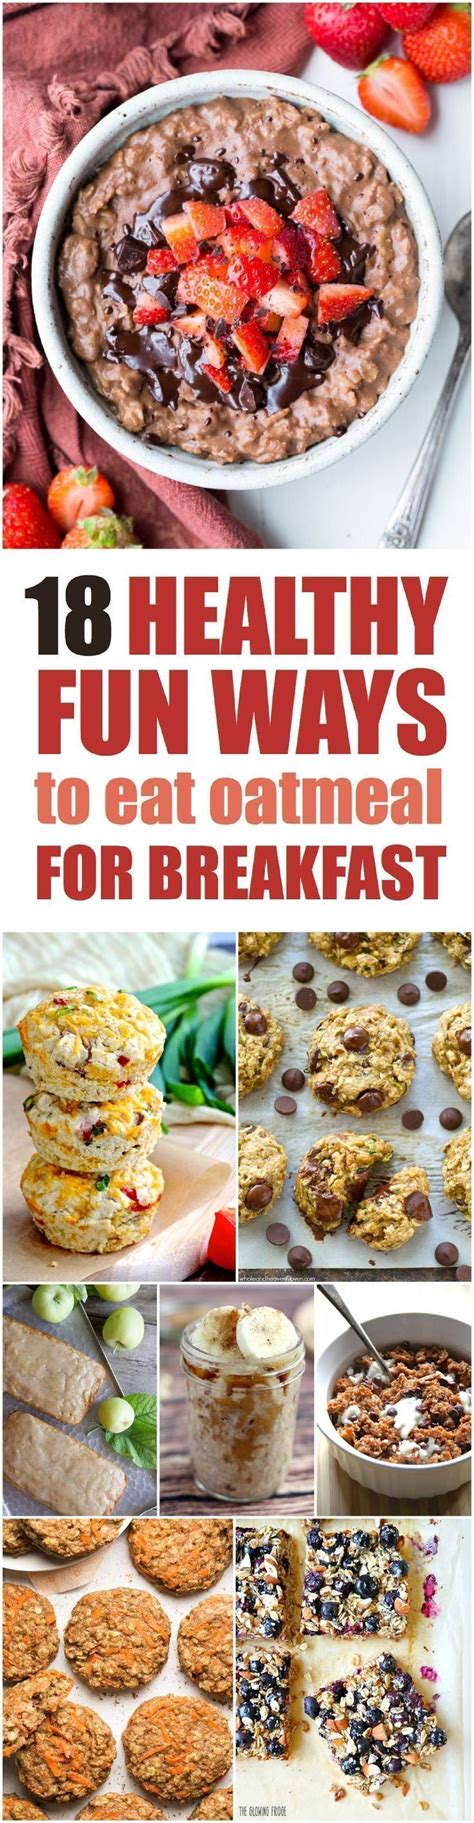 18 Healthy Fun Ways To Eat Oatmeal For Breakfast Six Clever Sisters Healthy Breakfast